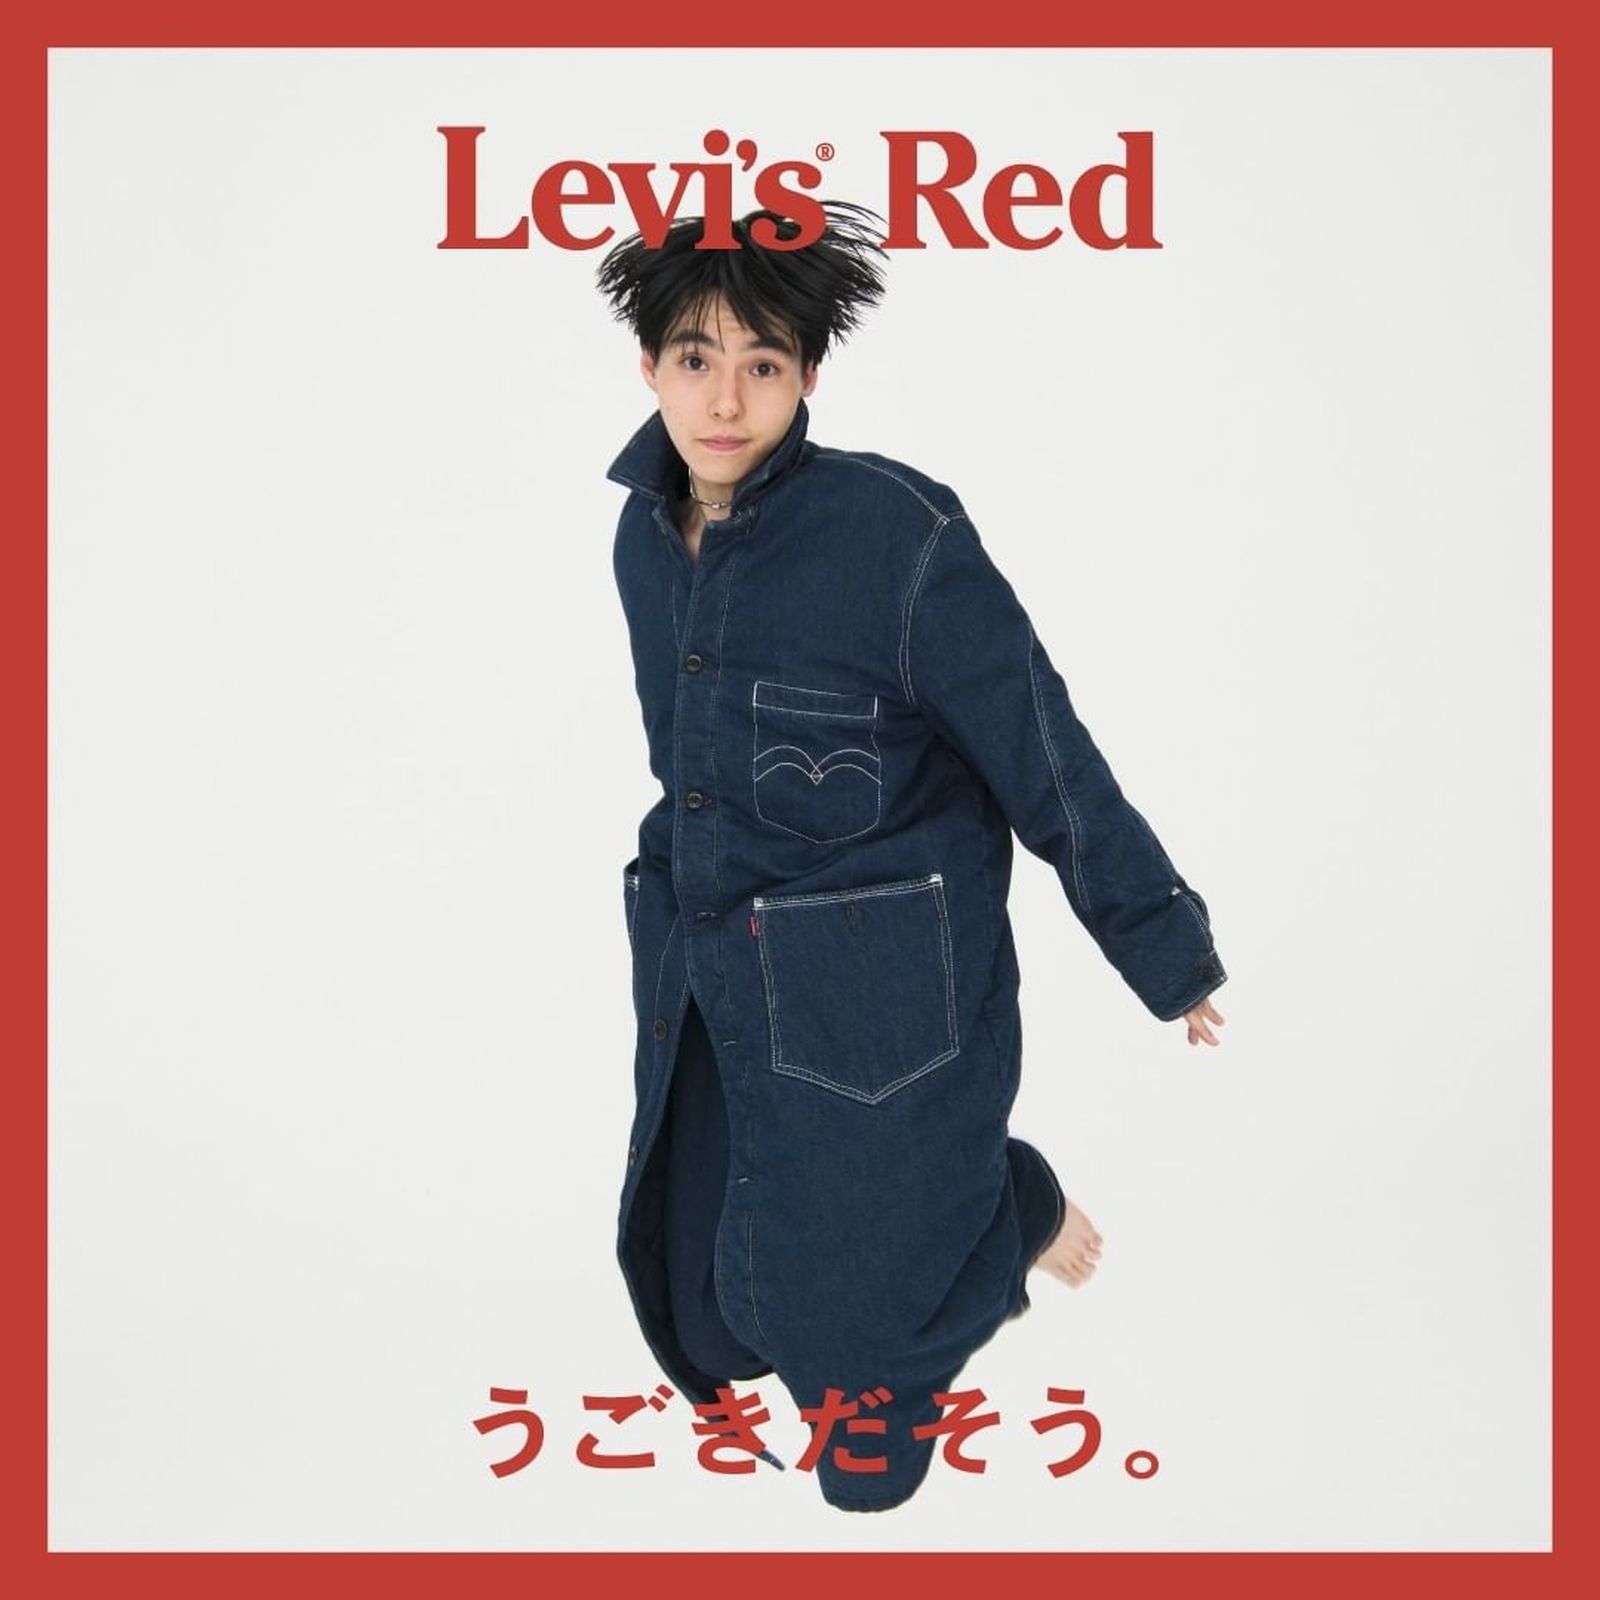 levis-red-fw21-collection (9)